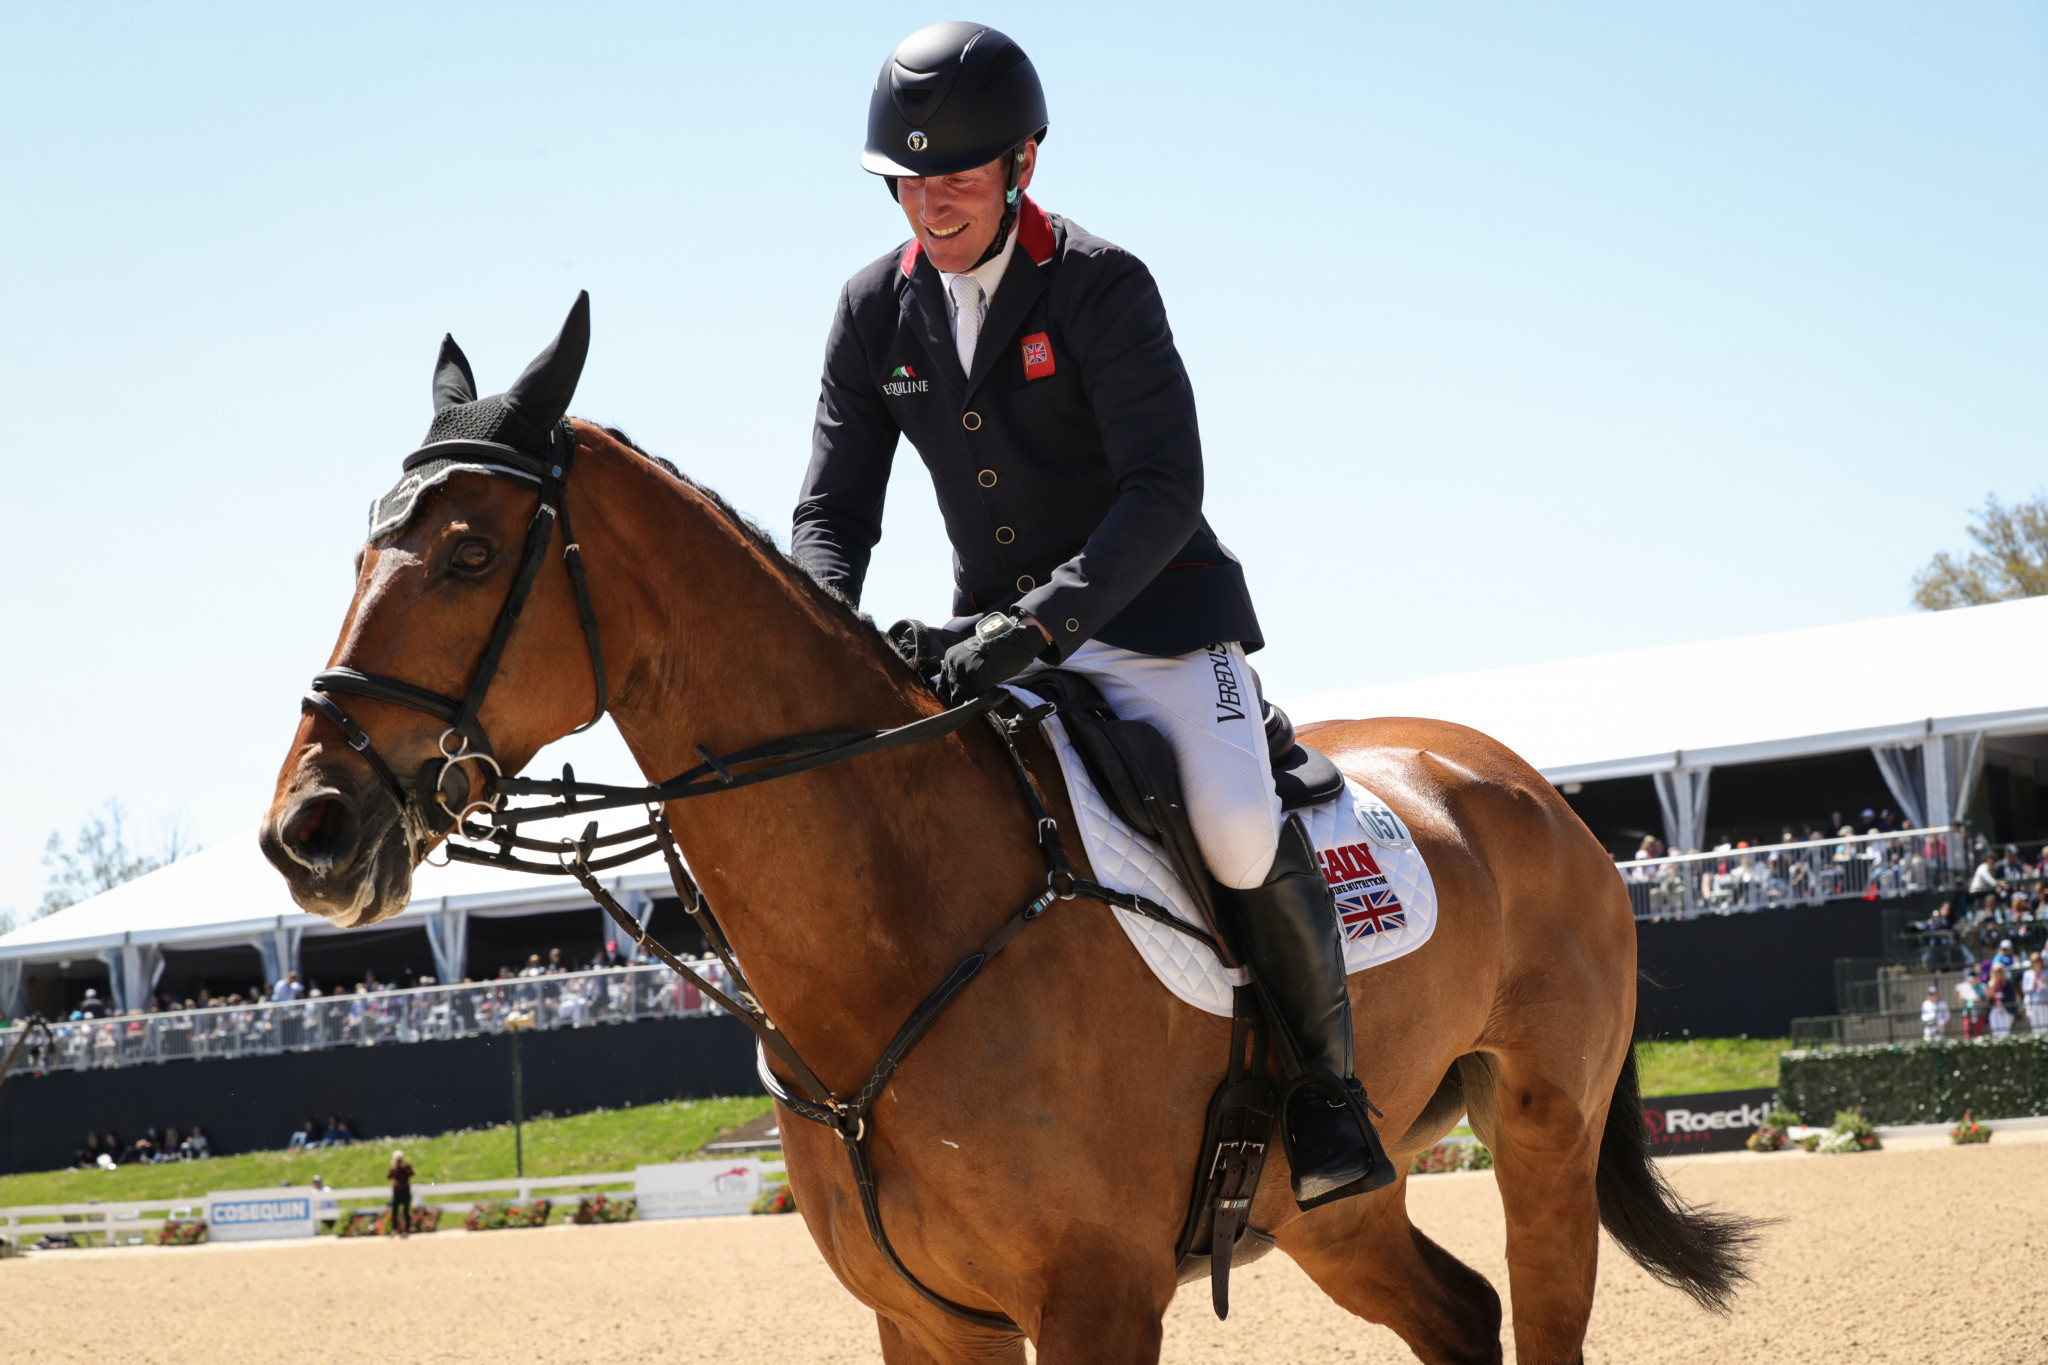 Townend in first and second place after the dressage phase of Badminton Horse Trials